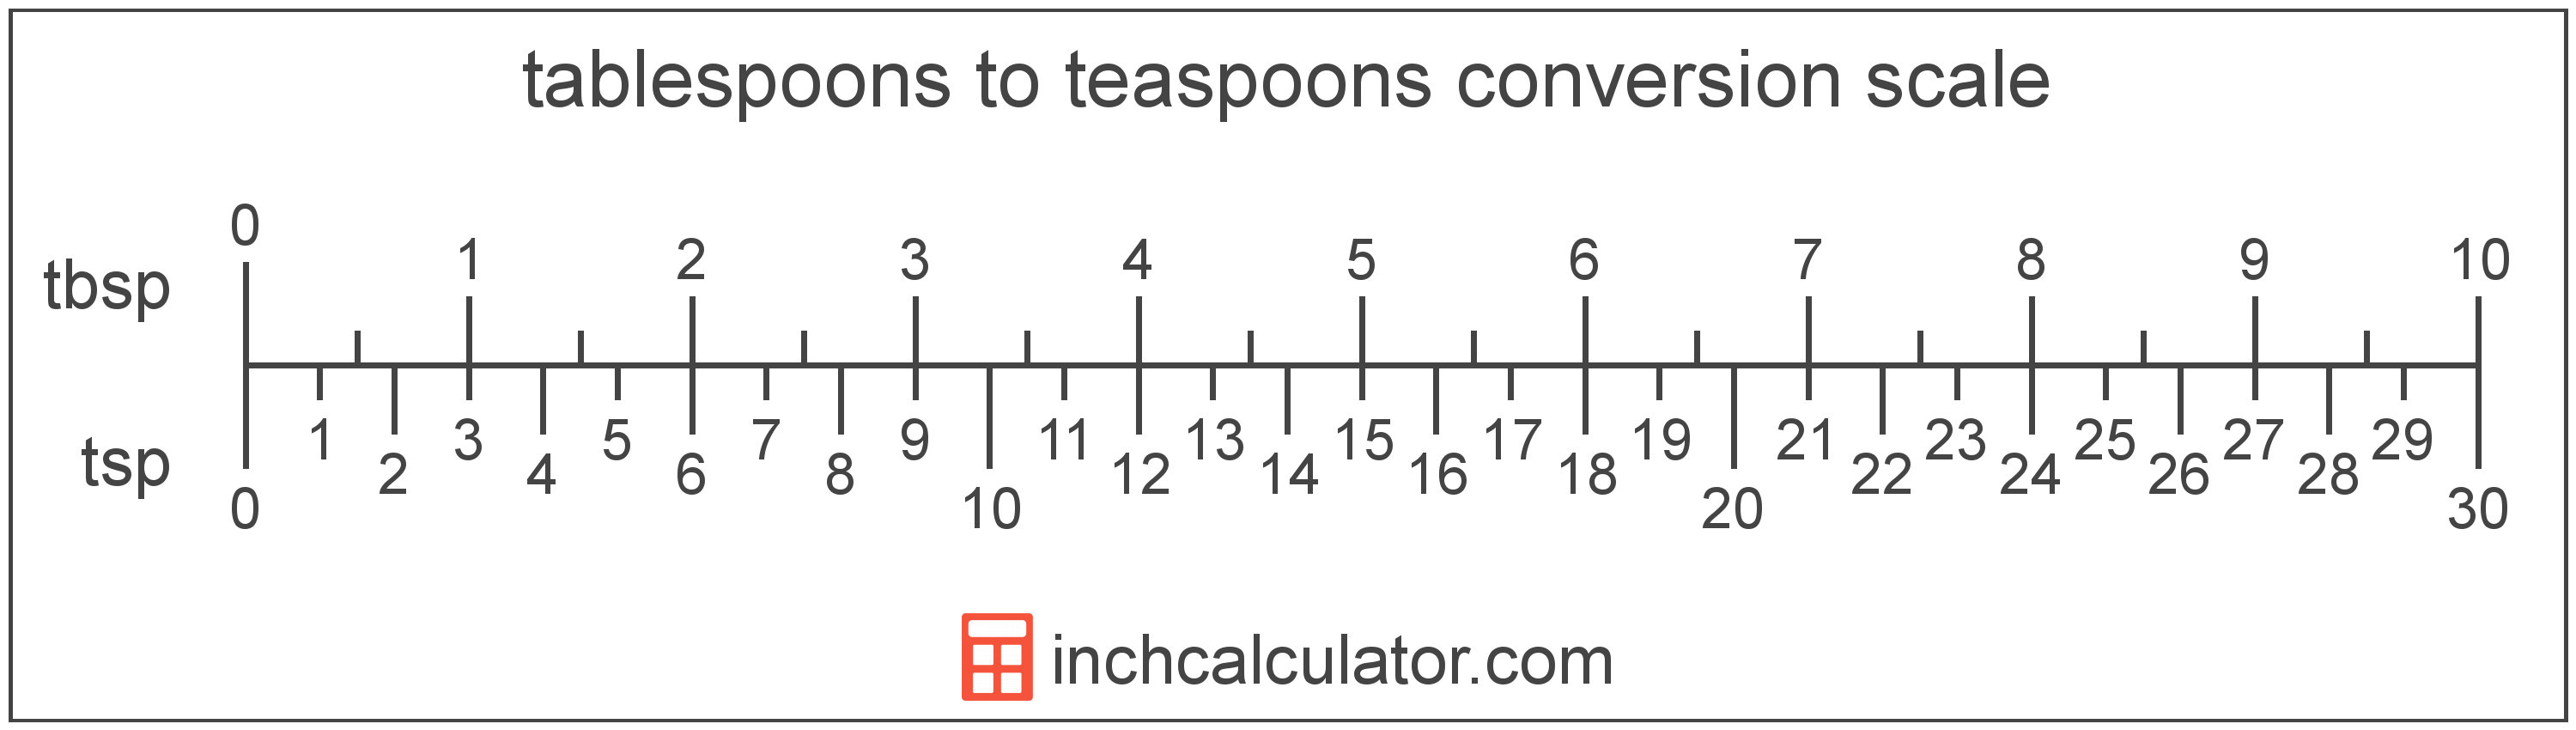 conversion scale showing tablespoons and equivalent teaspoons volume values